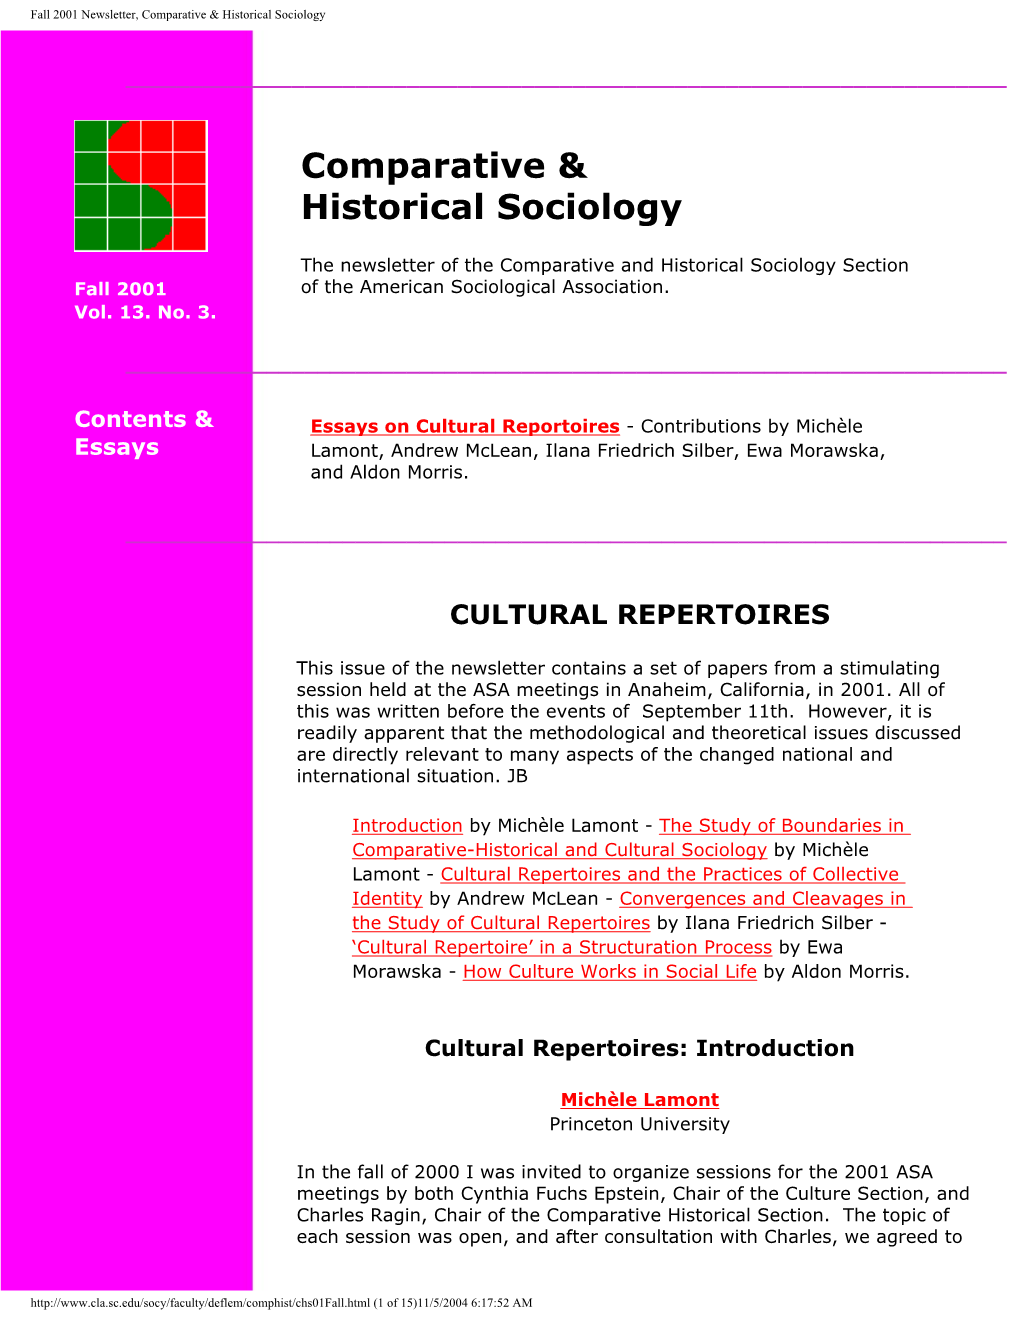 Fall 2001 Newsletter, Comparative & Historical Sociology